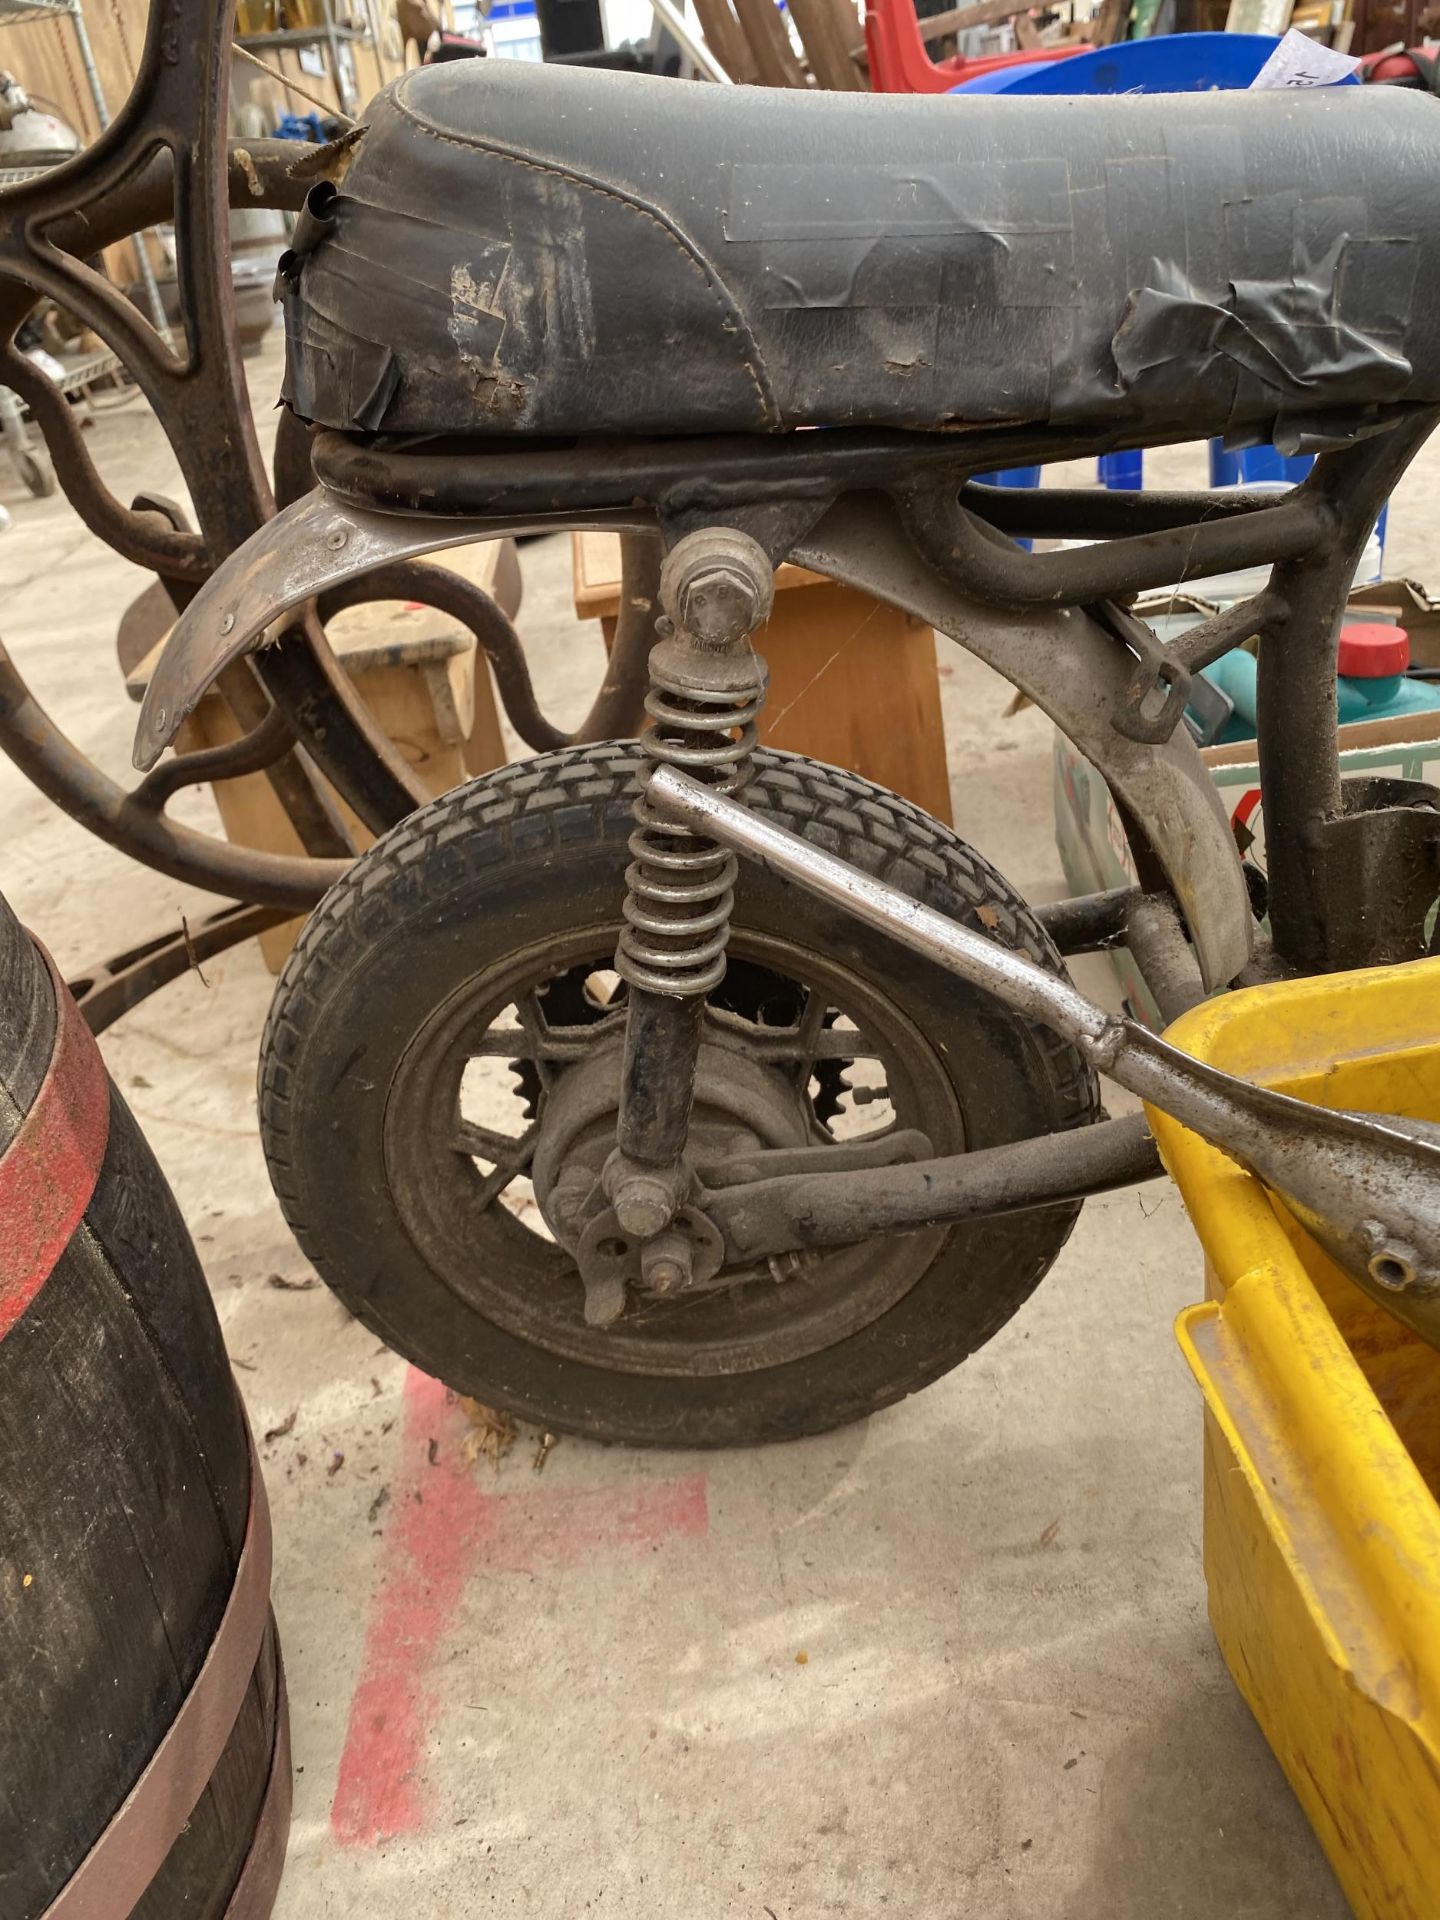 A SMALL MOTORBIKE AND SPARE PARTS FOR RESTORATION - Image 4 of 6